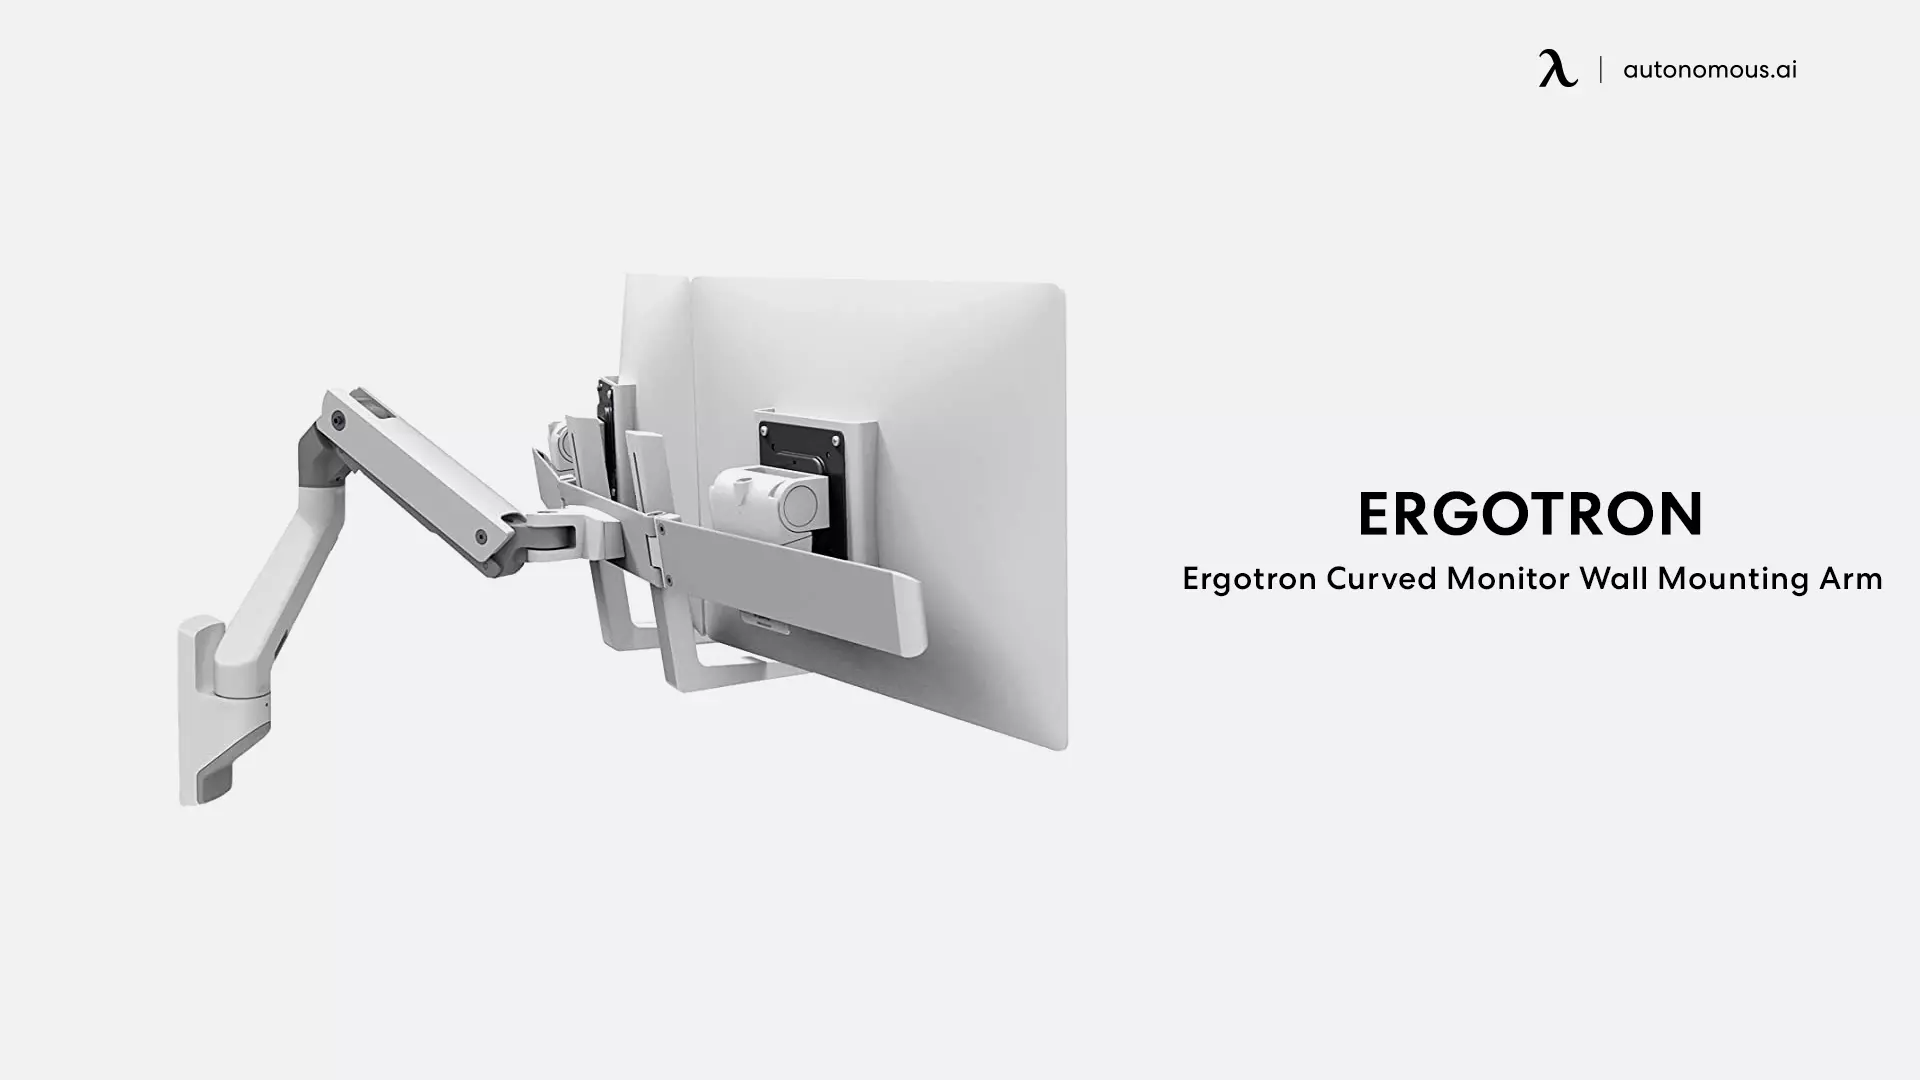 Ergotron Curved Monitor Wall Mounting Arm